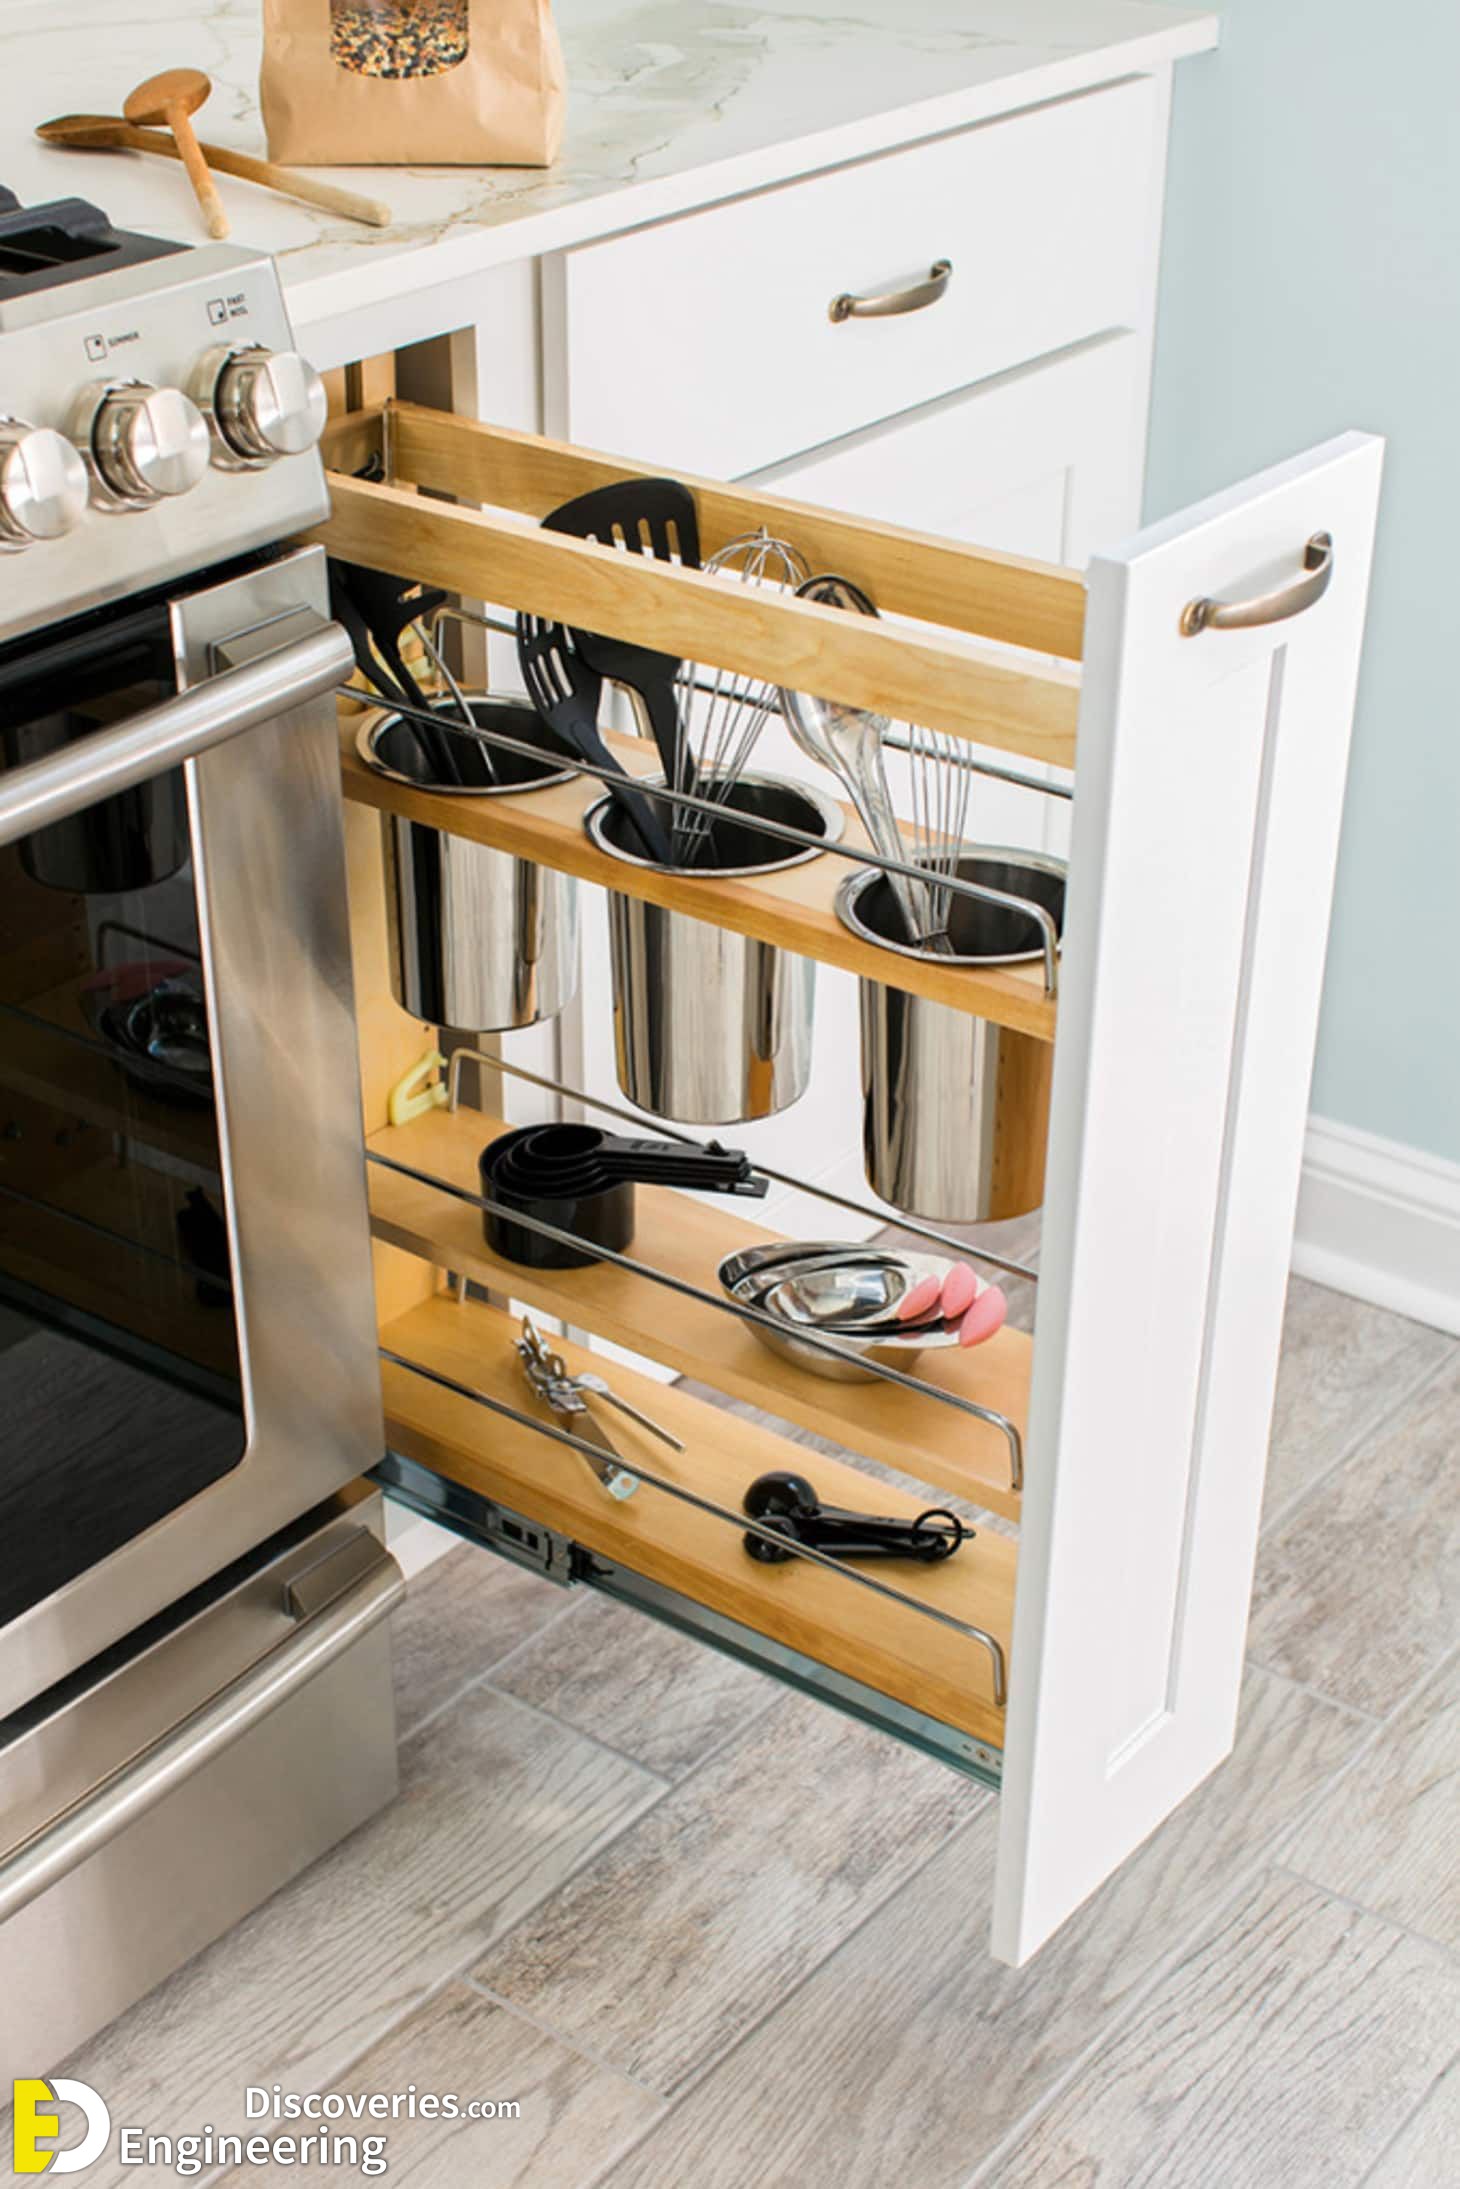 https://engineeringdiscoveries.com/wp-content/uploads/2023/09/5-engineering-discoveries-maximize-your-space-brilliant-kitchen-organization-ideas-for-effortless-cabinet-storage.jpg